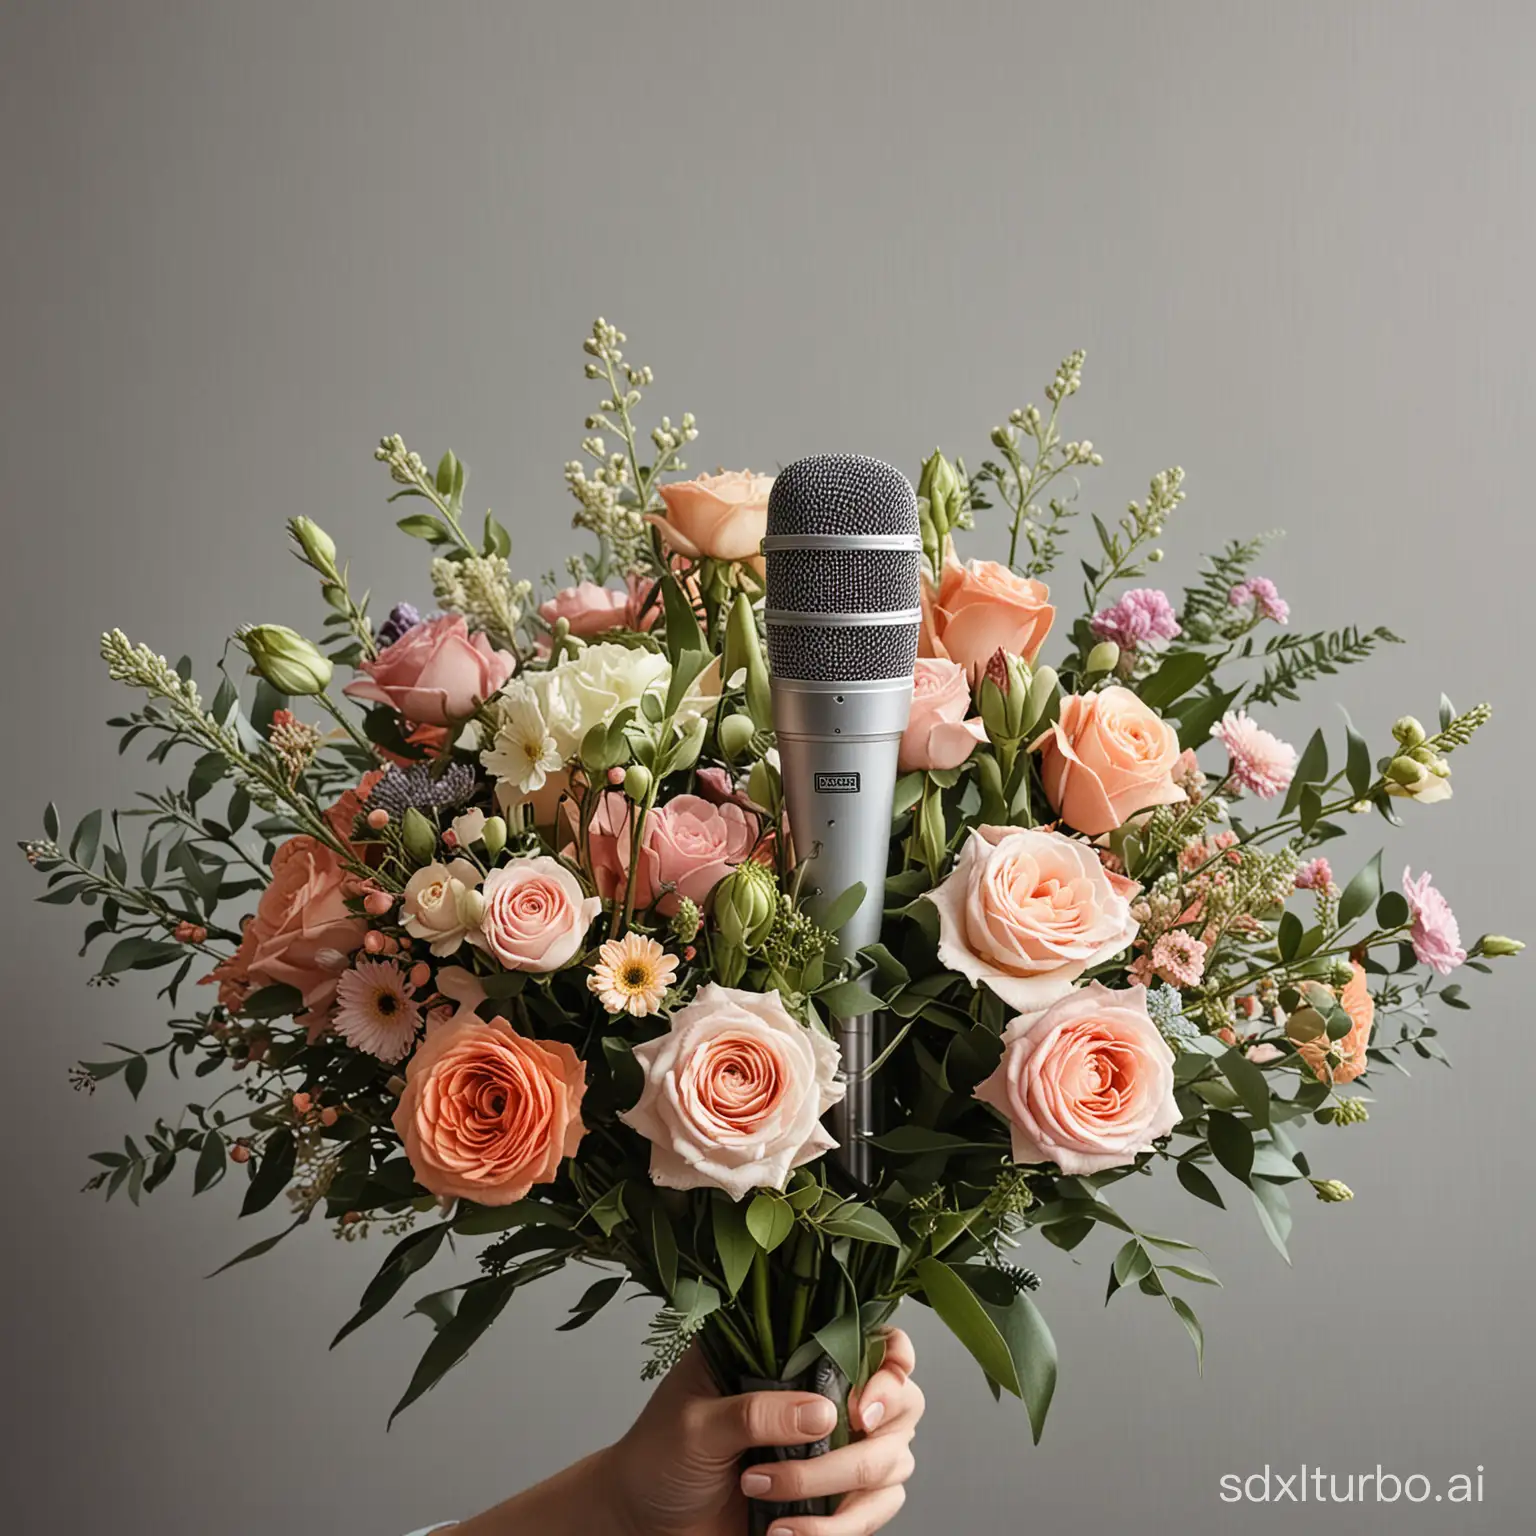 Floral-Serenade-Bouquet-Singing-with-Microphone